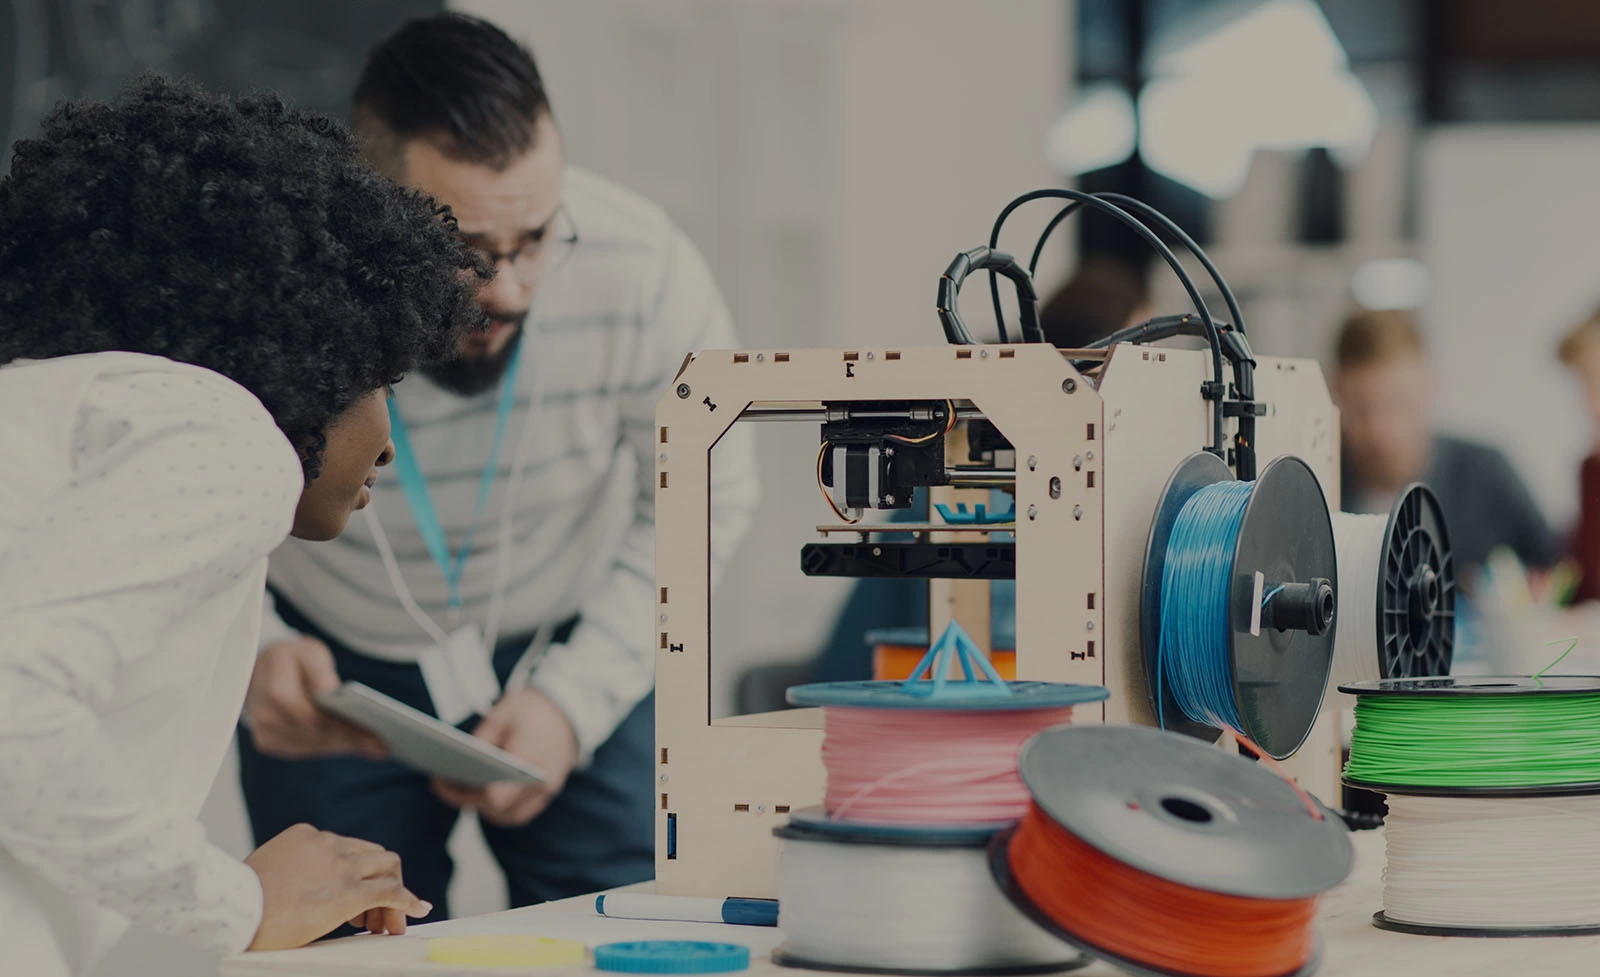 Diversity startup business team working together by 3D printer. Looking at printer working and discussing.  Man with beard and headphones around his neck holding digital tablet out and explaining to his african female coworker. Other coworkers working smoothly in background